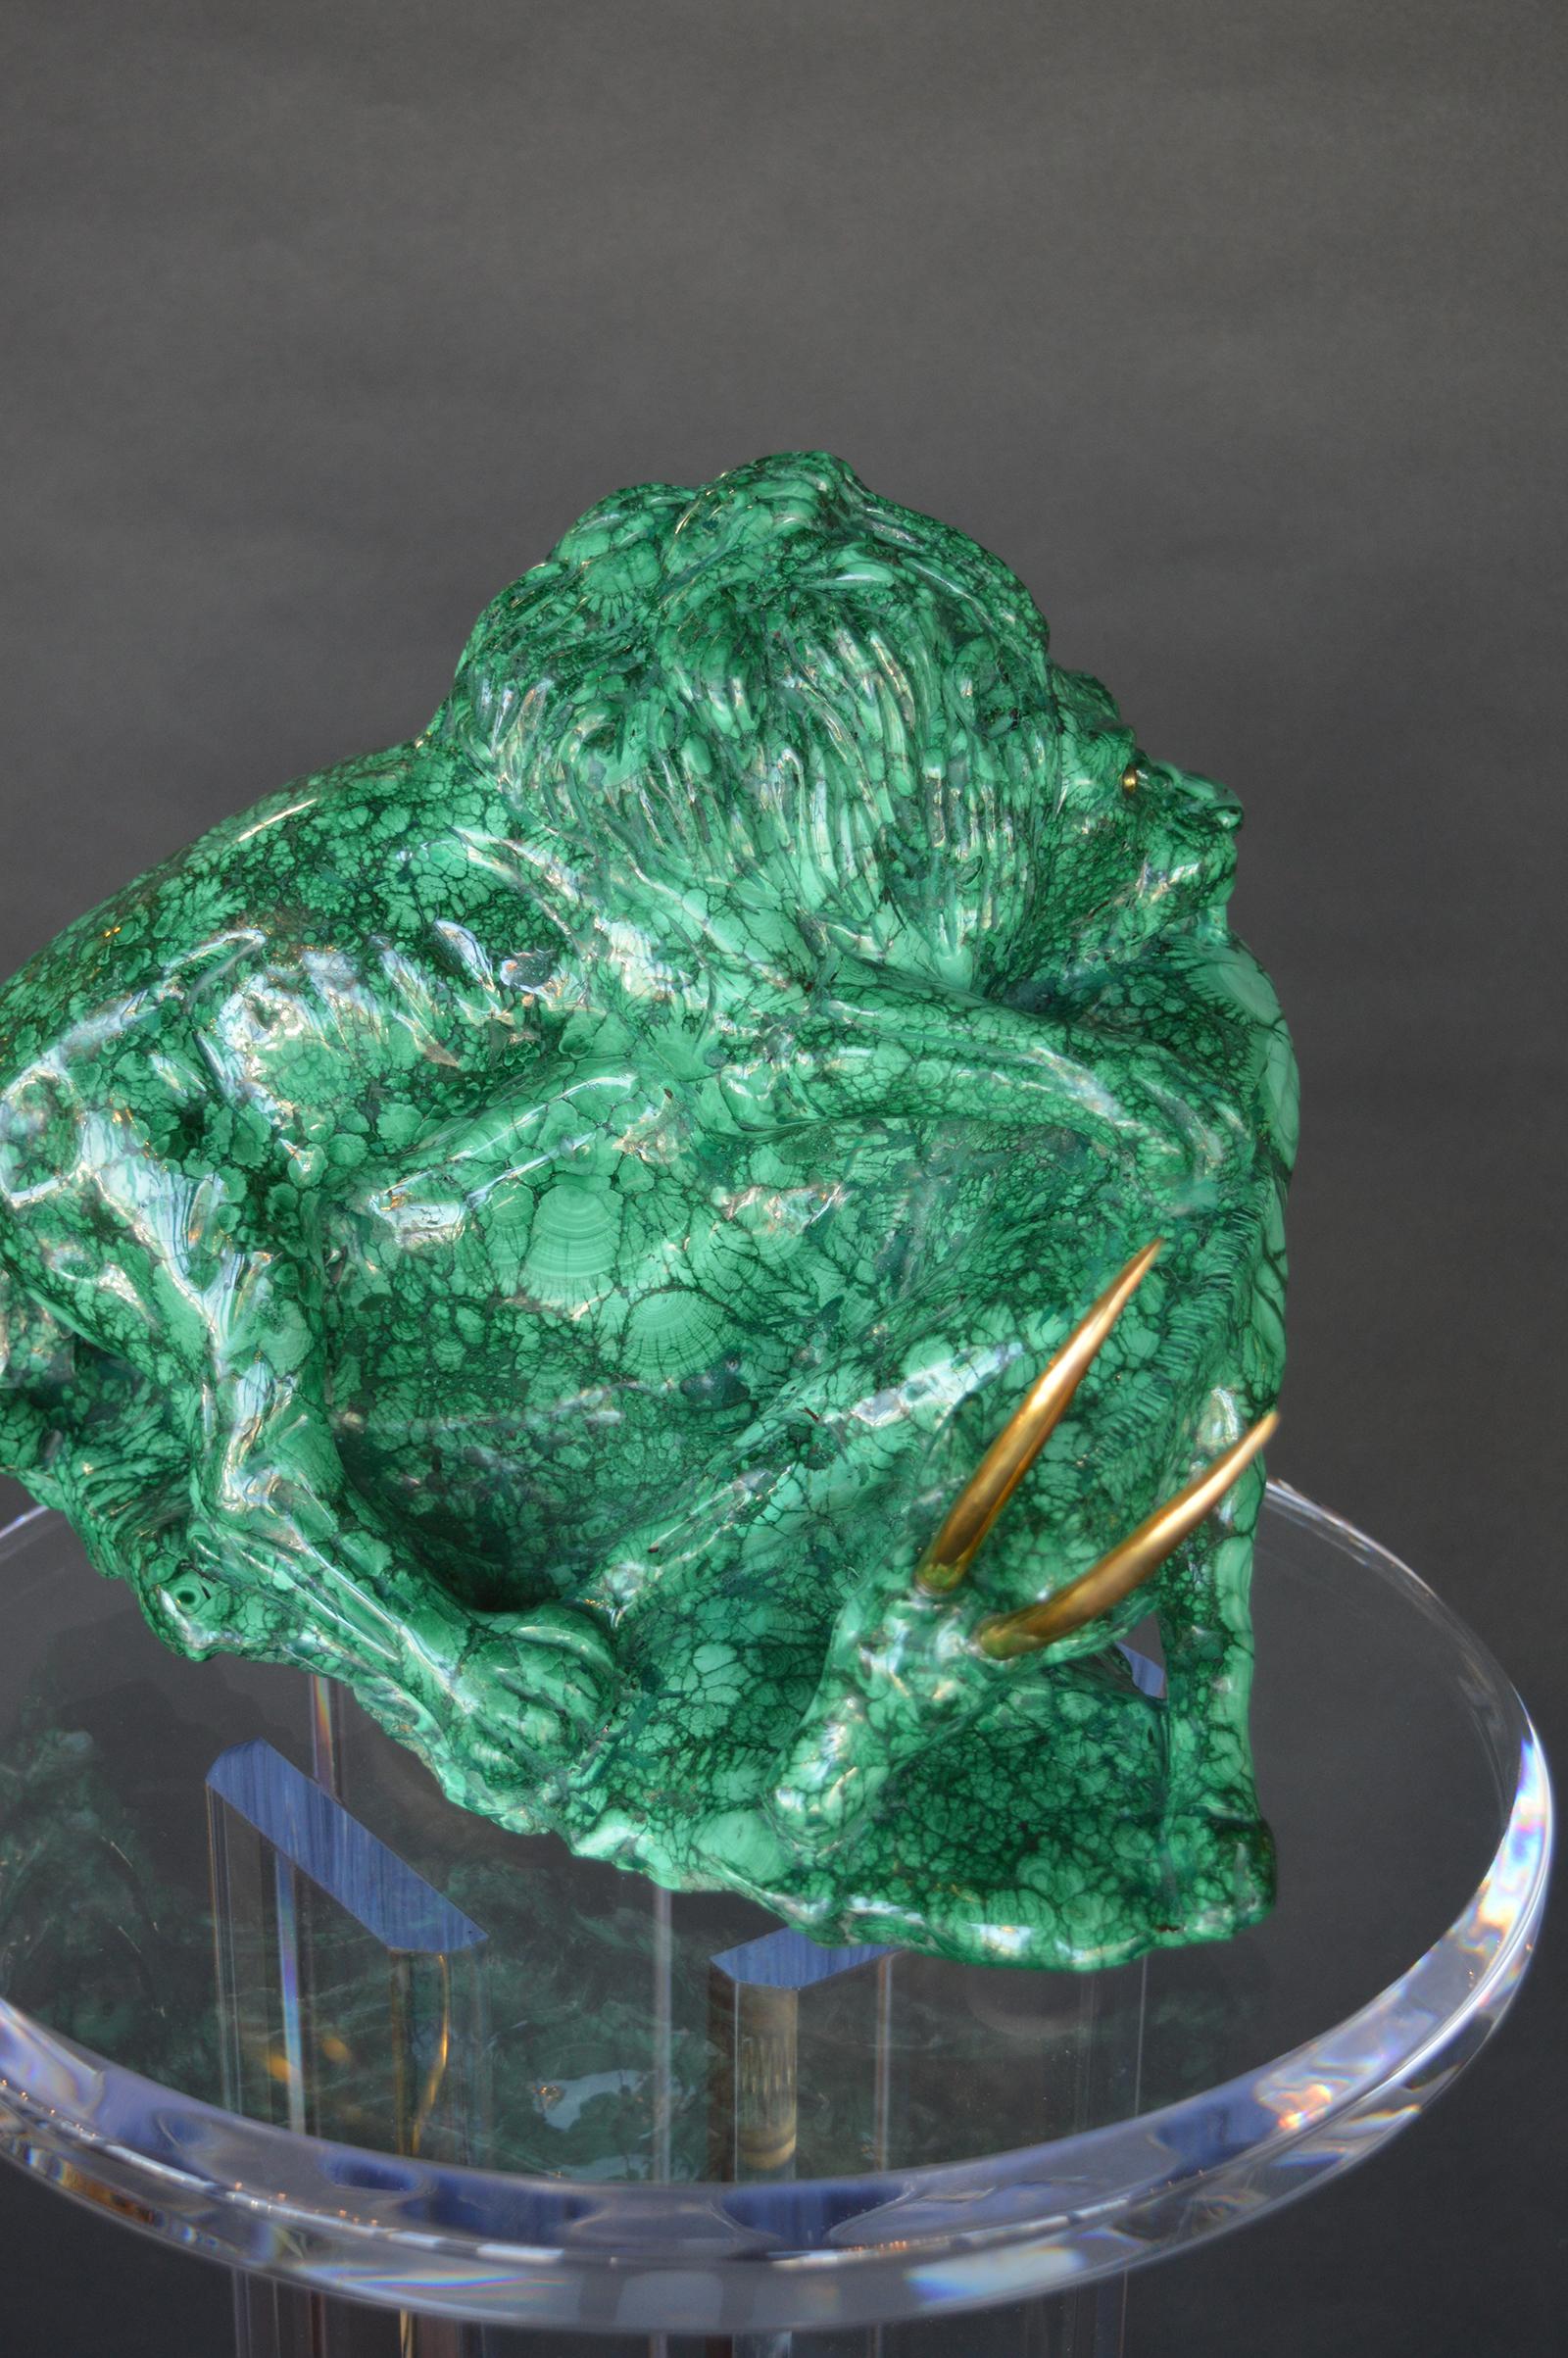 Malachite sculpture of a Lion hunting a gazelle. Lions eyes are made of bronze as are the gazelles horns.
Pedestal Measures: 42 inches H x 13 inches D 
Sculpture Measures: 9.5 inches H x 12.5 inches D.